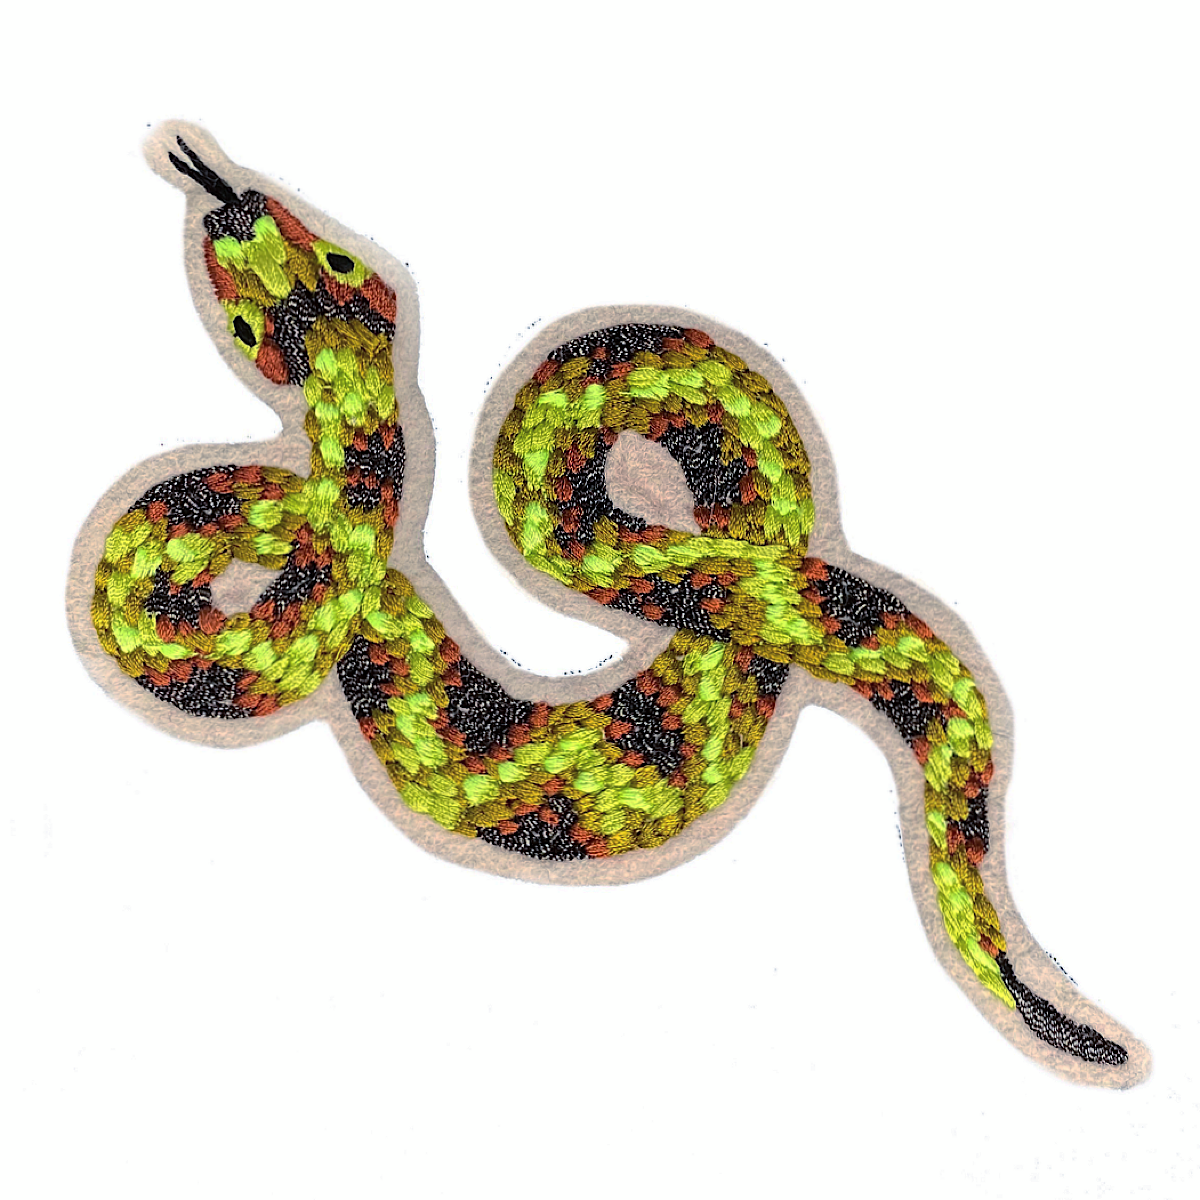 Embroidered snake patch on cream felt on white background